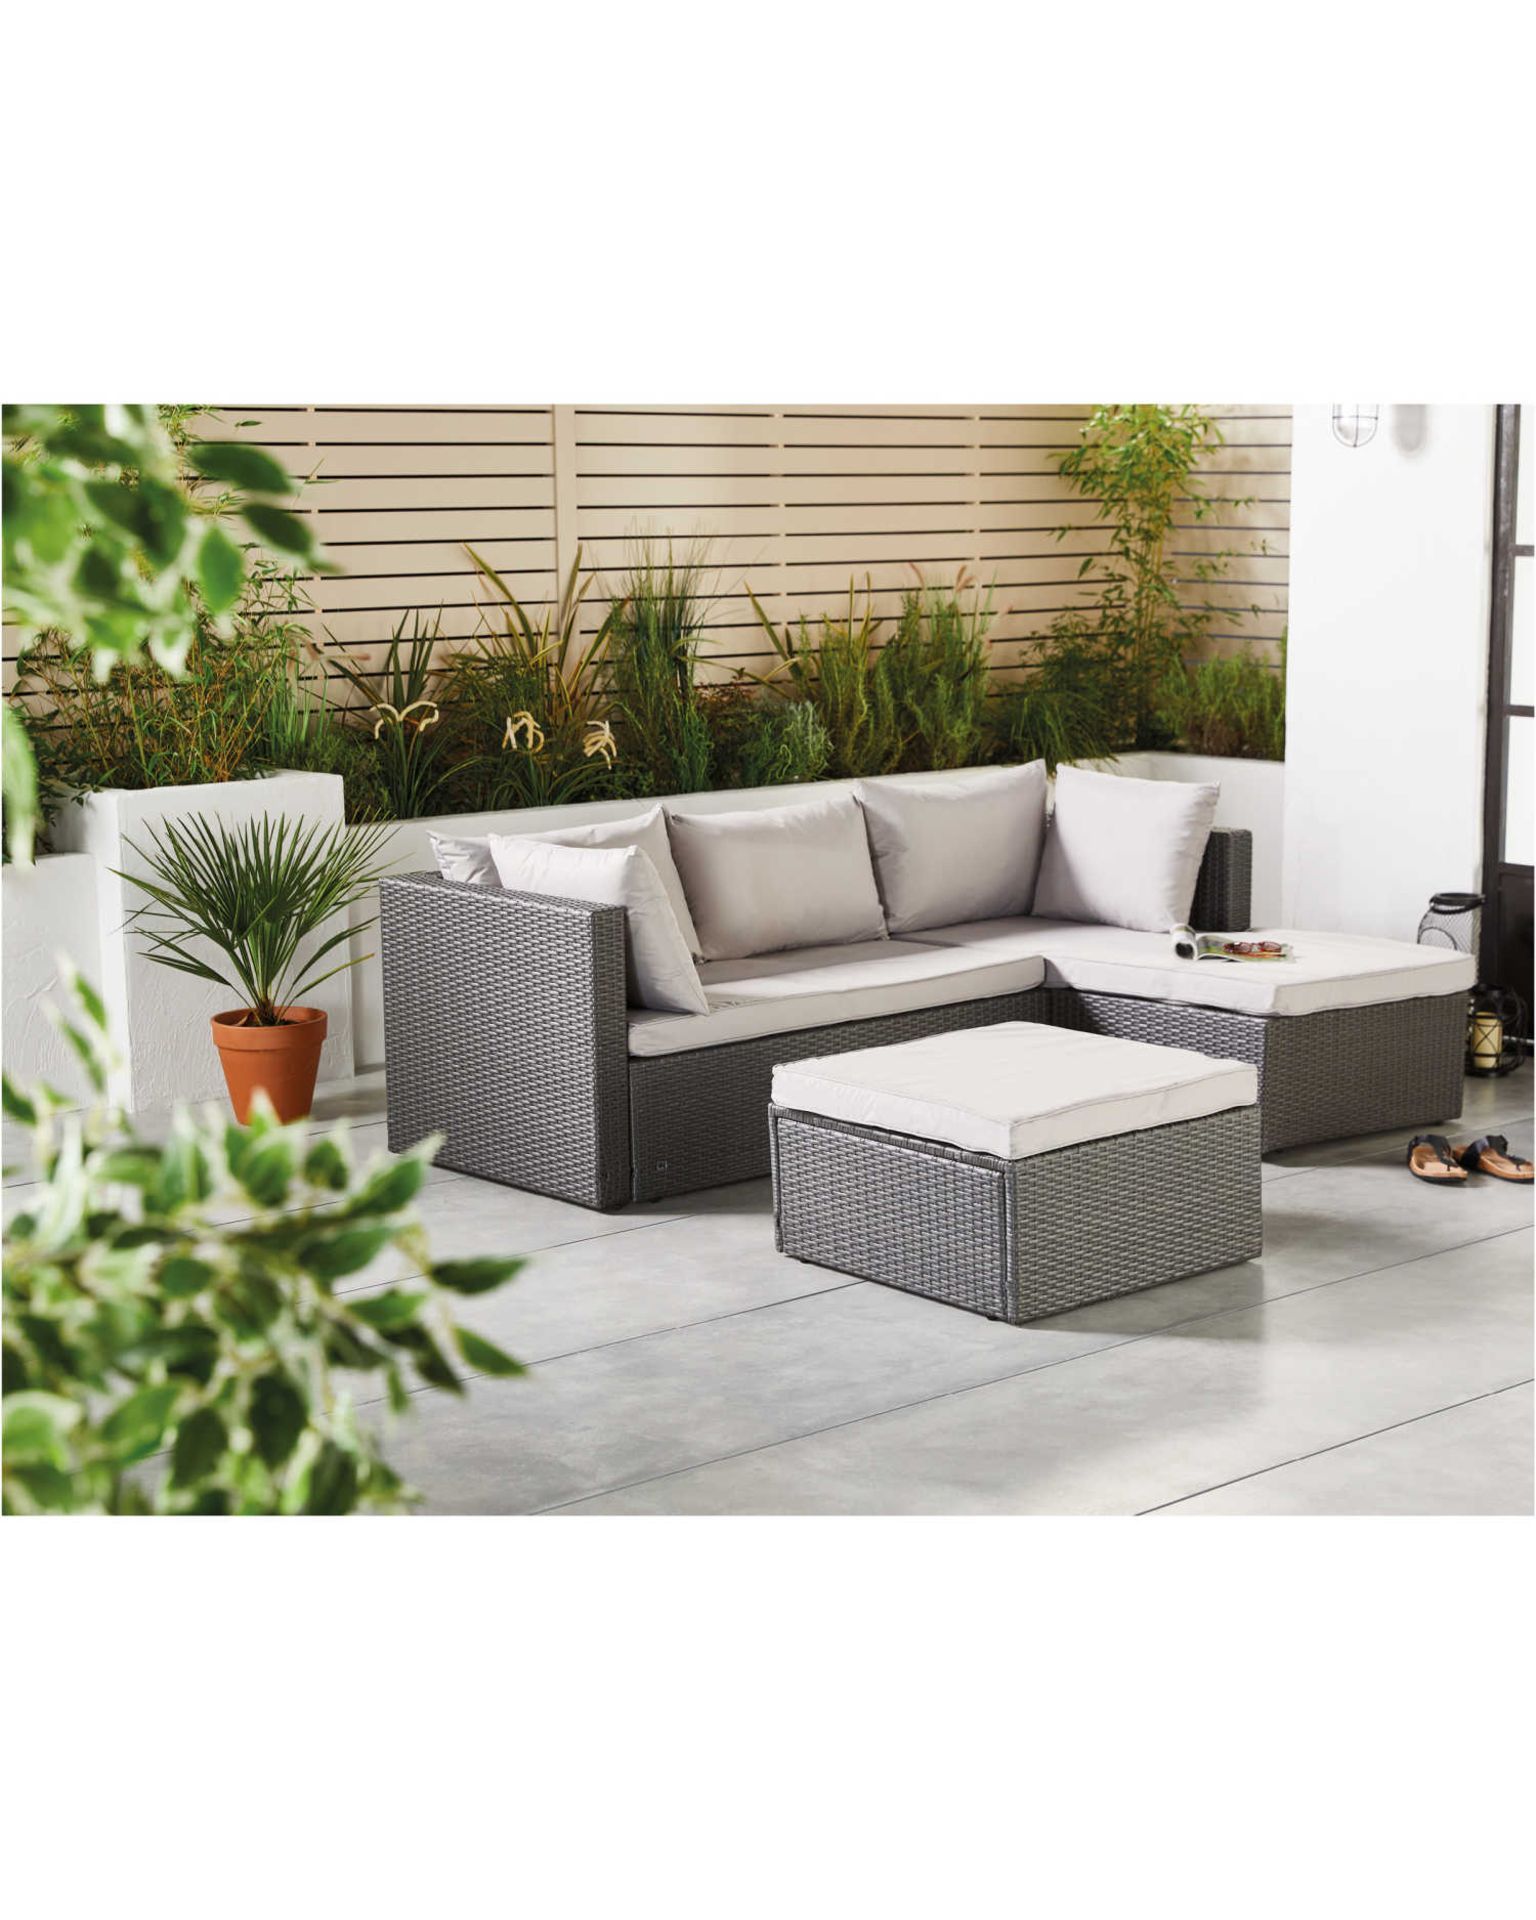 New & Boxed Luxury Grey & Anthracite Corner Sofa Set. Soak in the sun and feel that summer breeze